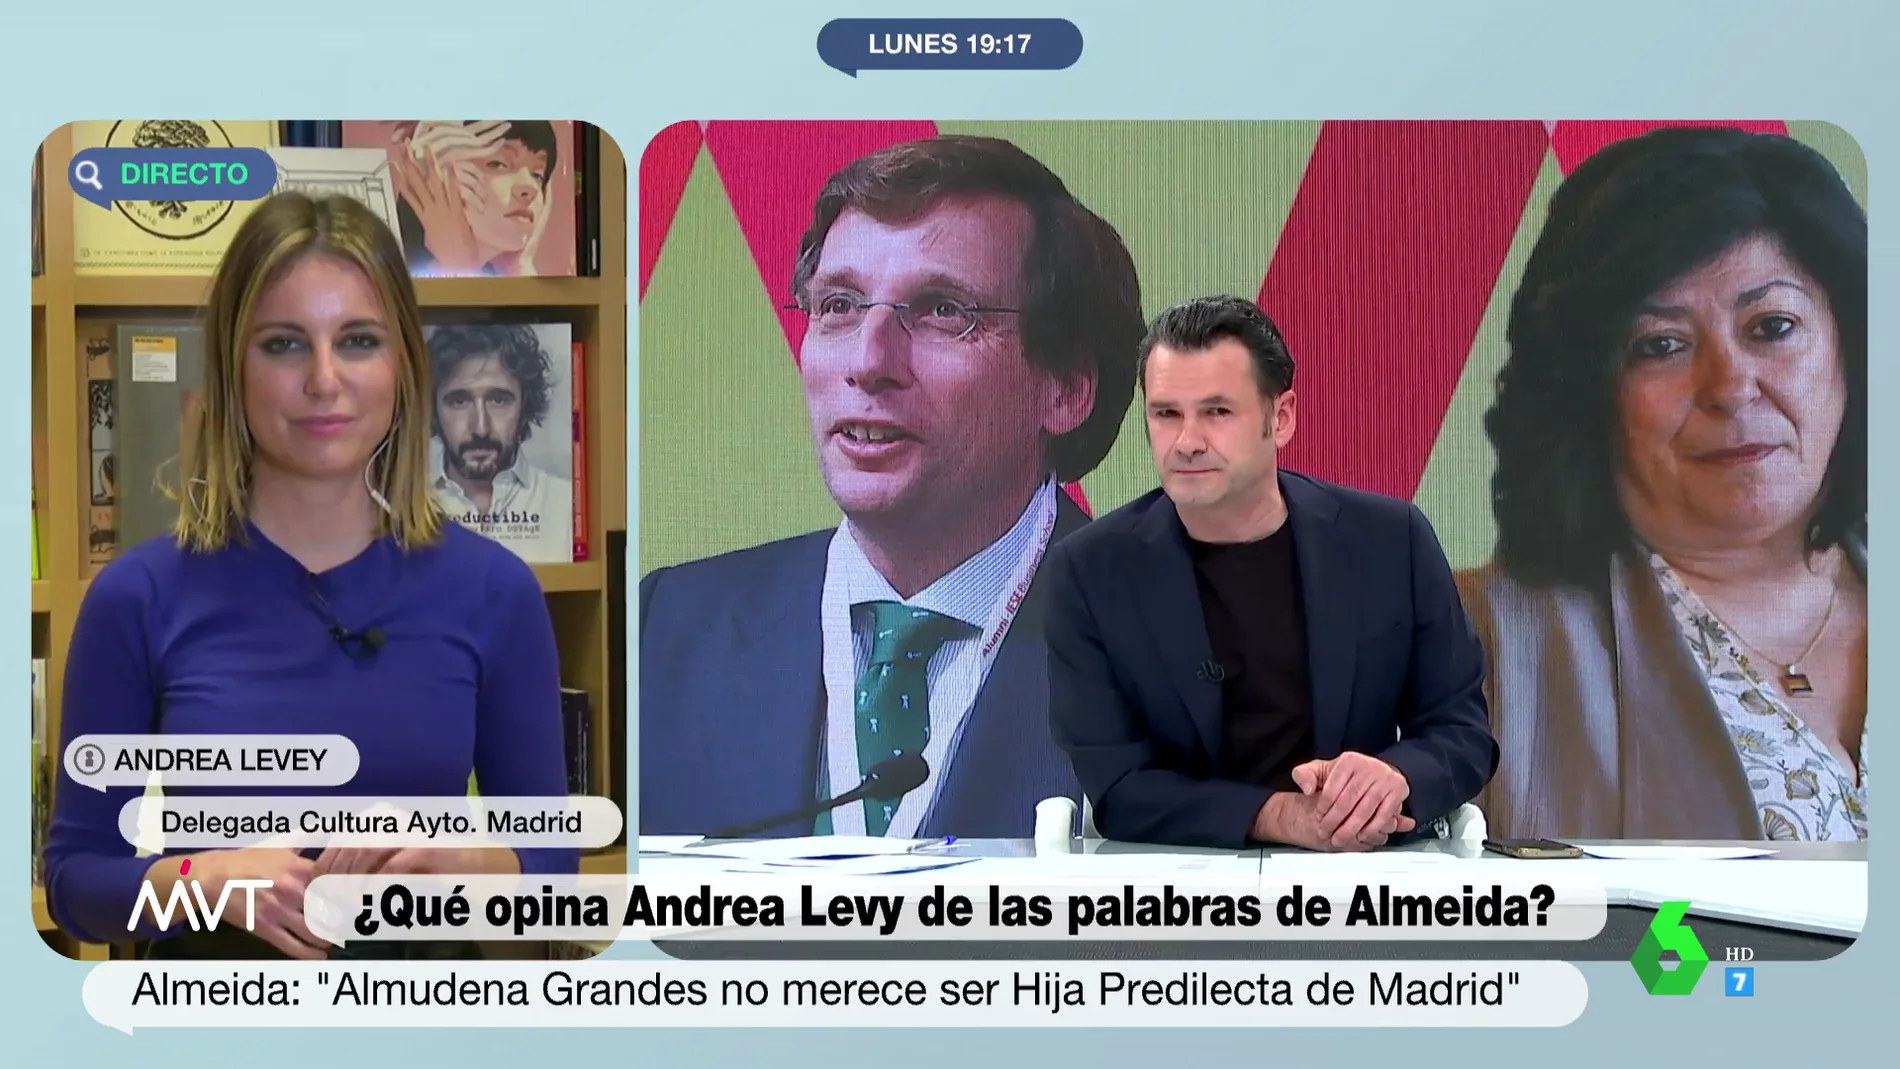 ANDREA LEVY